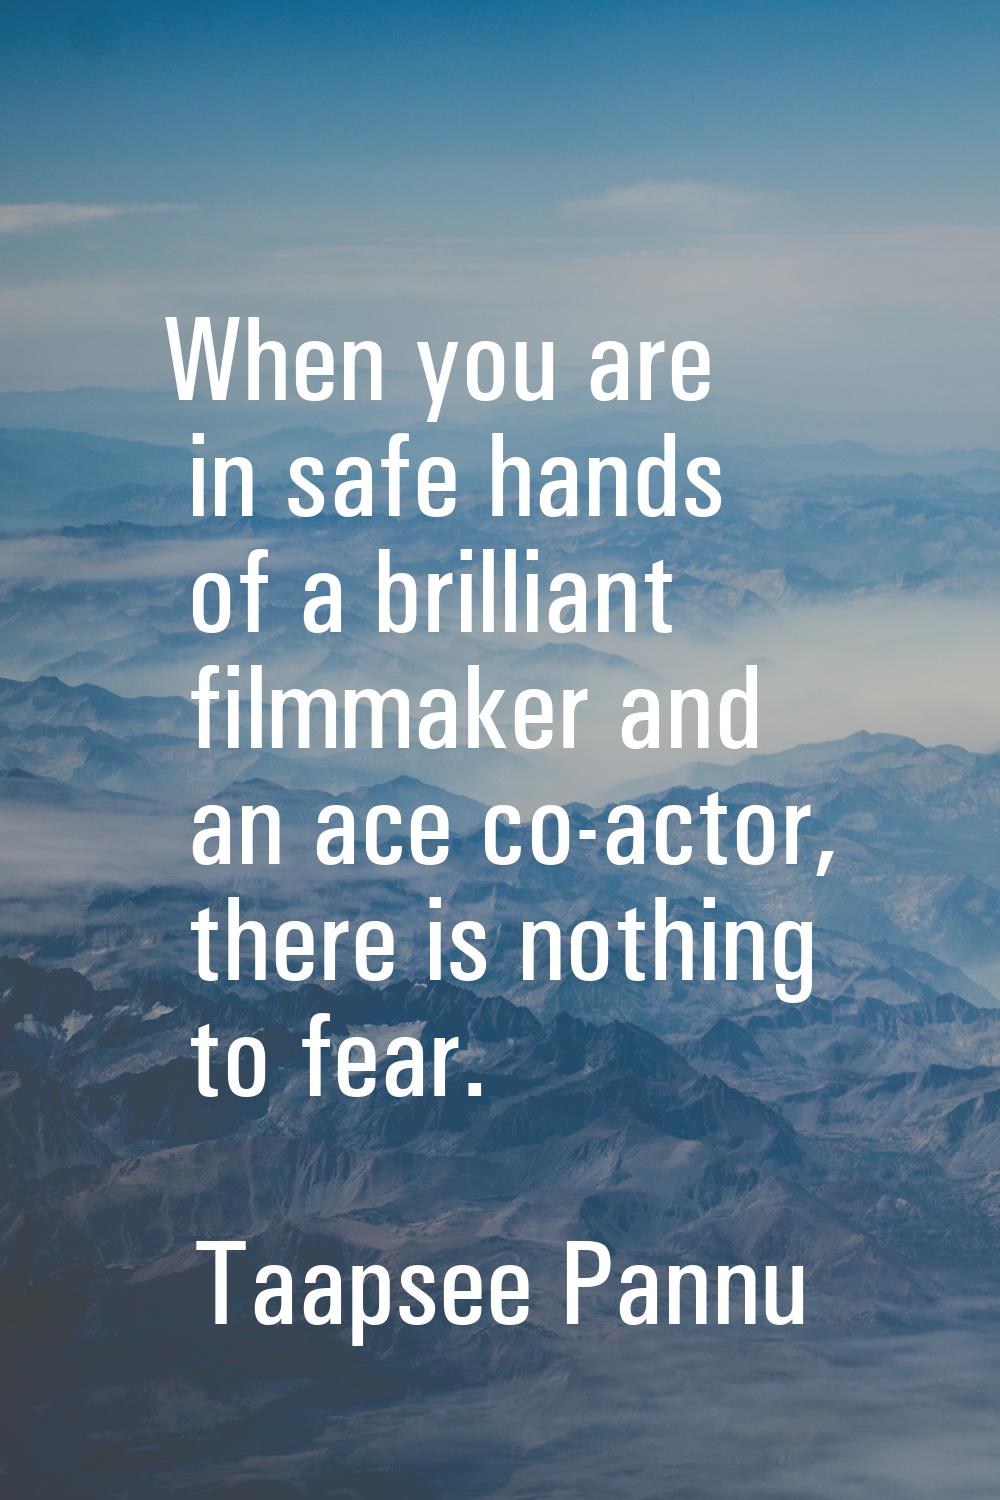 When you are in safe hands of a brilliant filmmaker and an ace co-actor, there is nothing to fear.